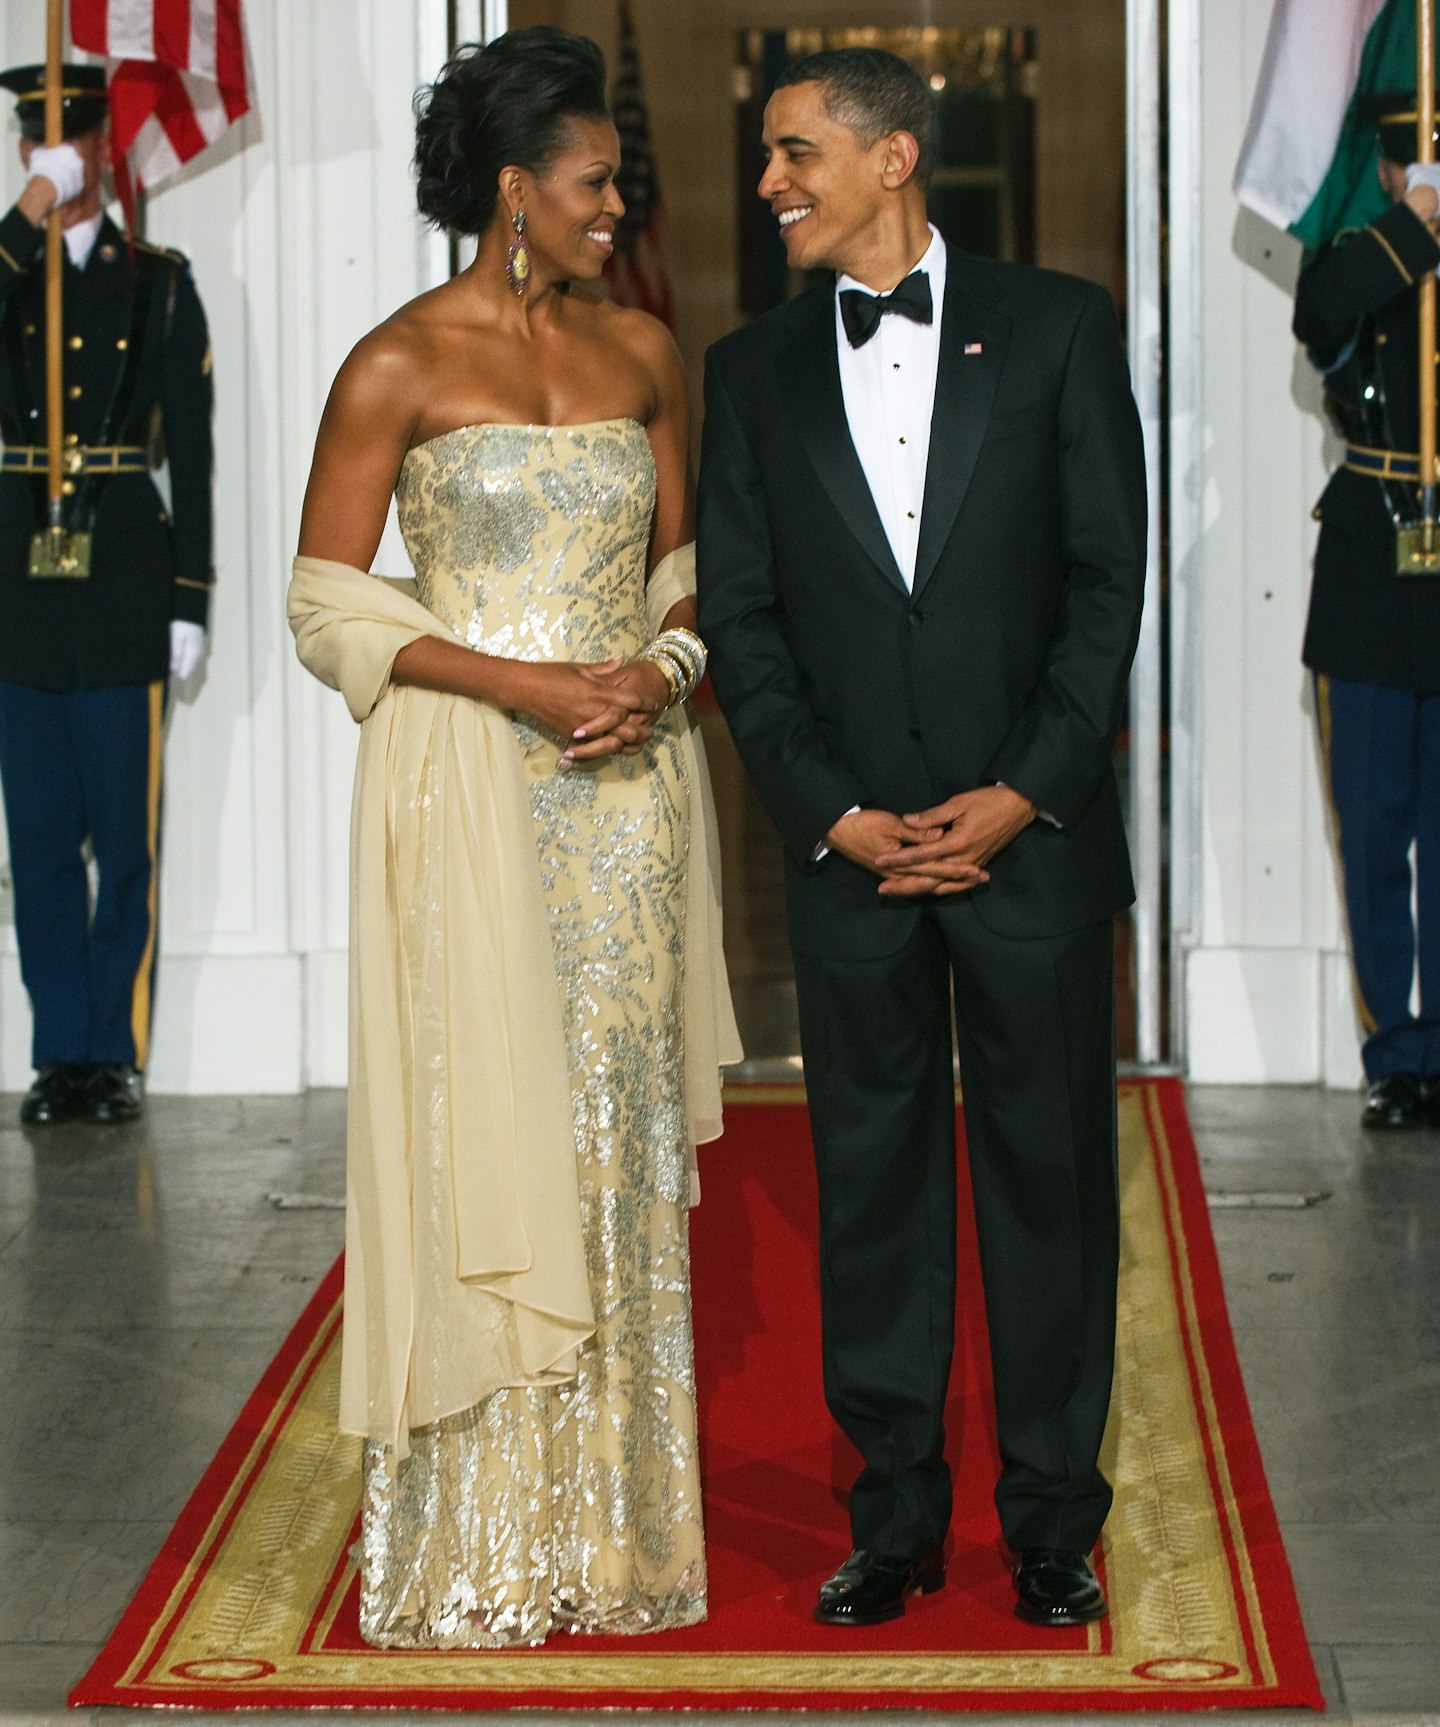 US President Barack Obama stands with First Lady Michelle Obama shortly before greeting Indian Prime Minister Manmohan Singh and his wife Gursharan Kaur at the North Portico of the White House November 24, 2009